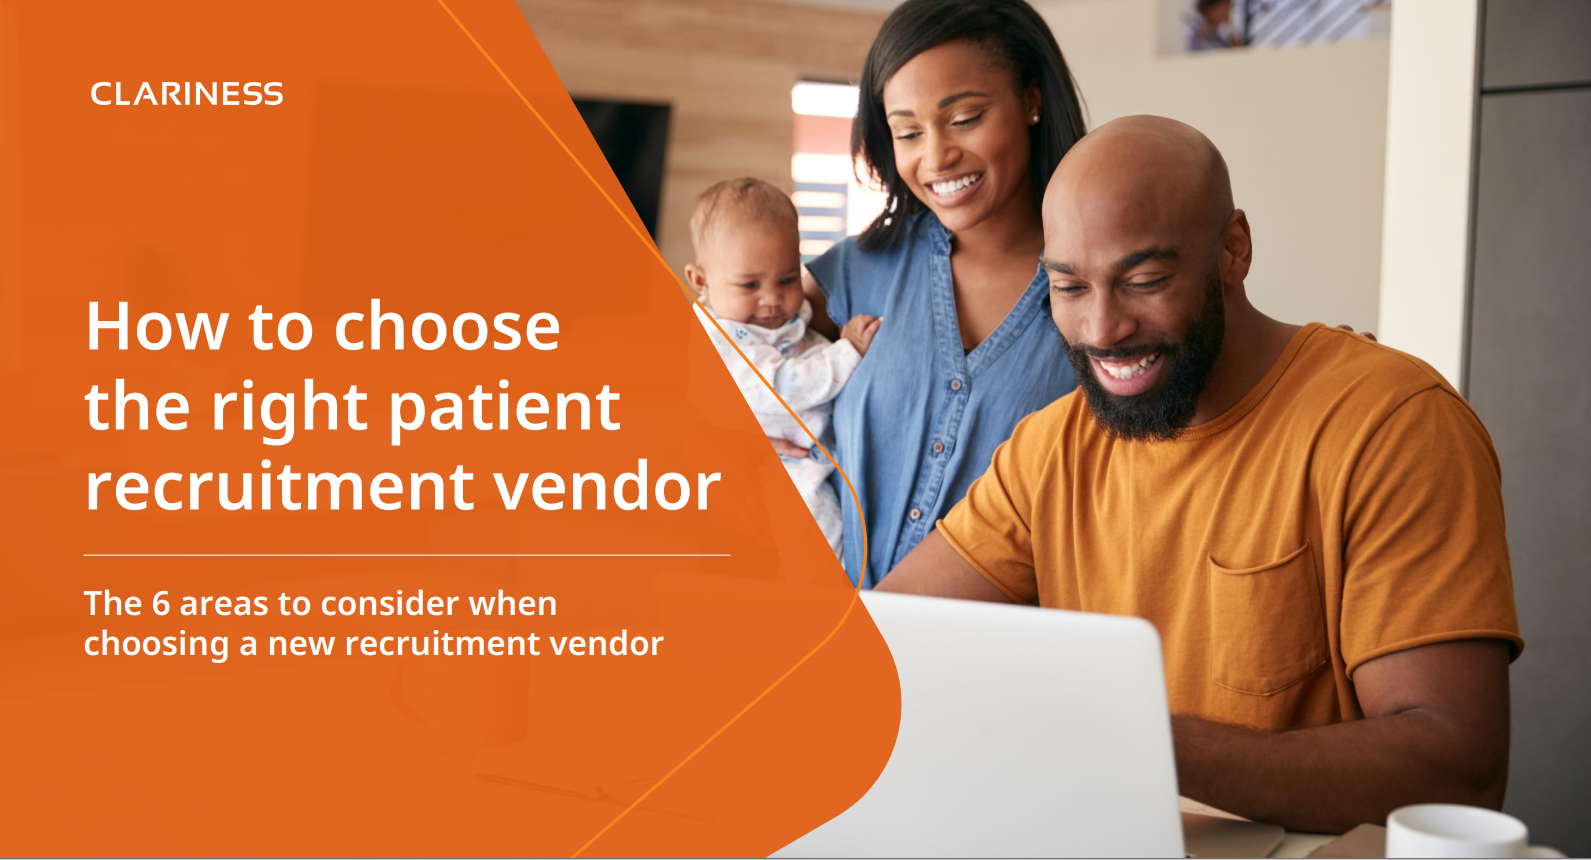 Buyer’s guide: How to choose the right patient recruitment vendor